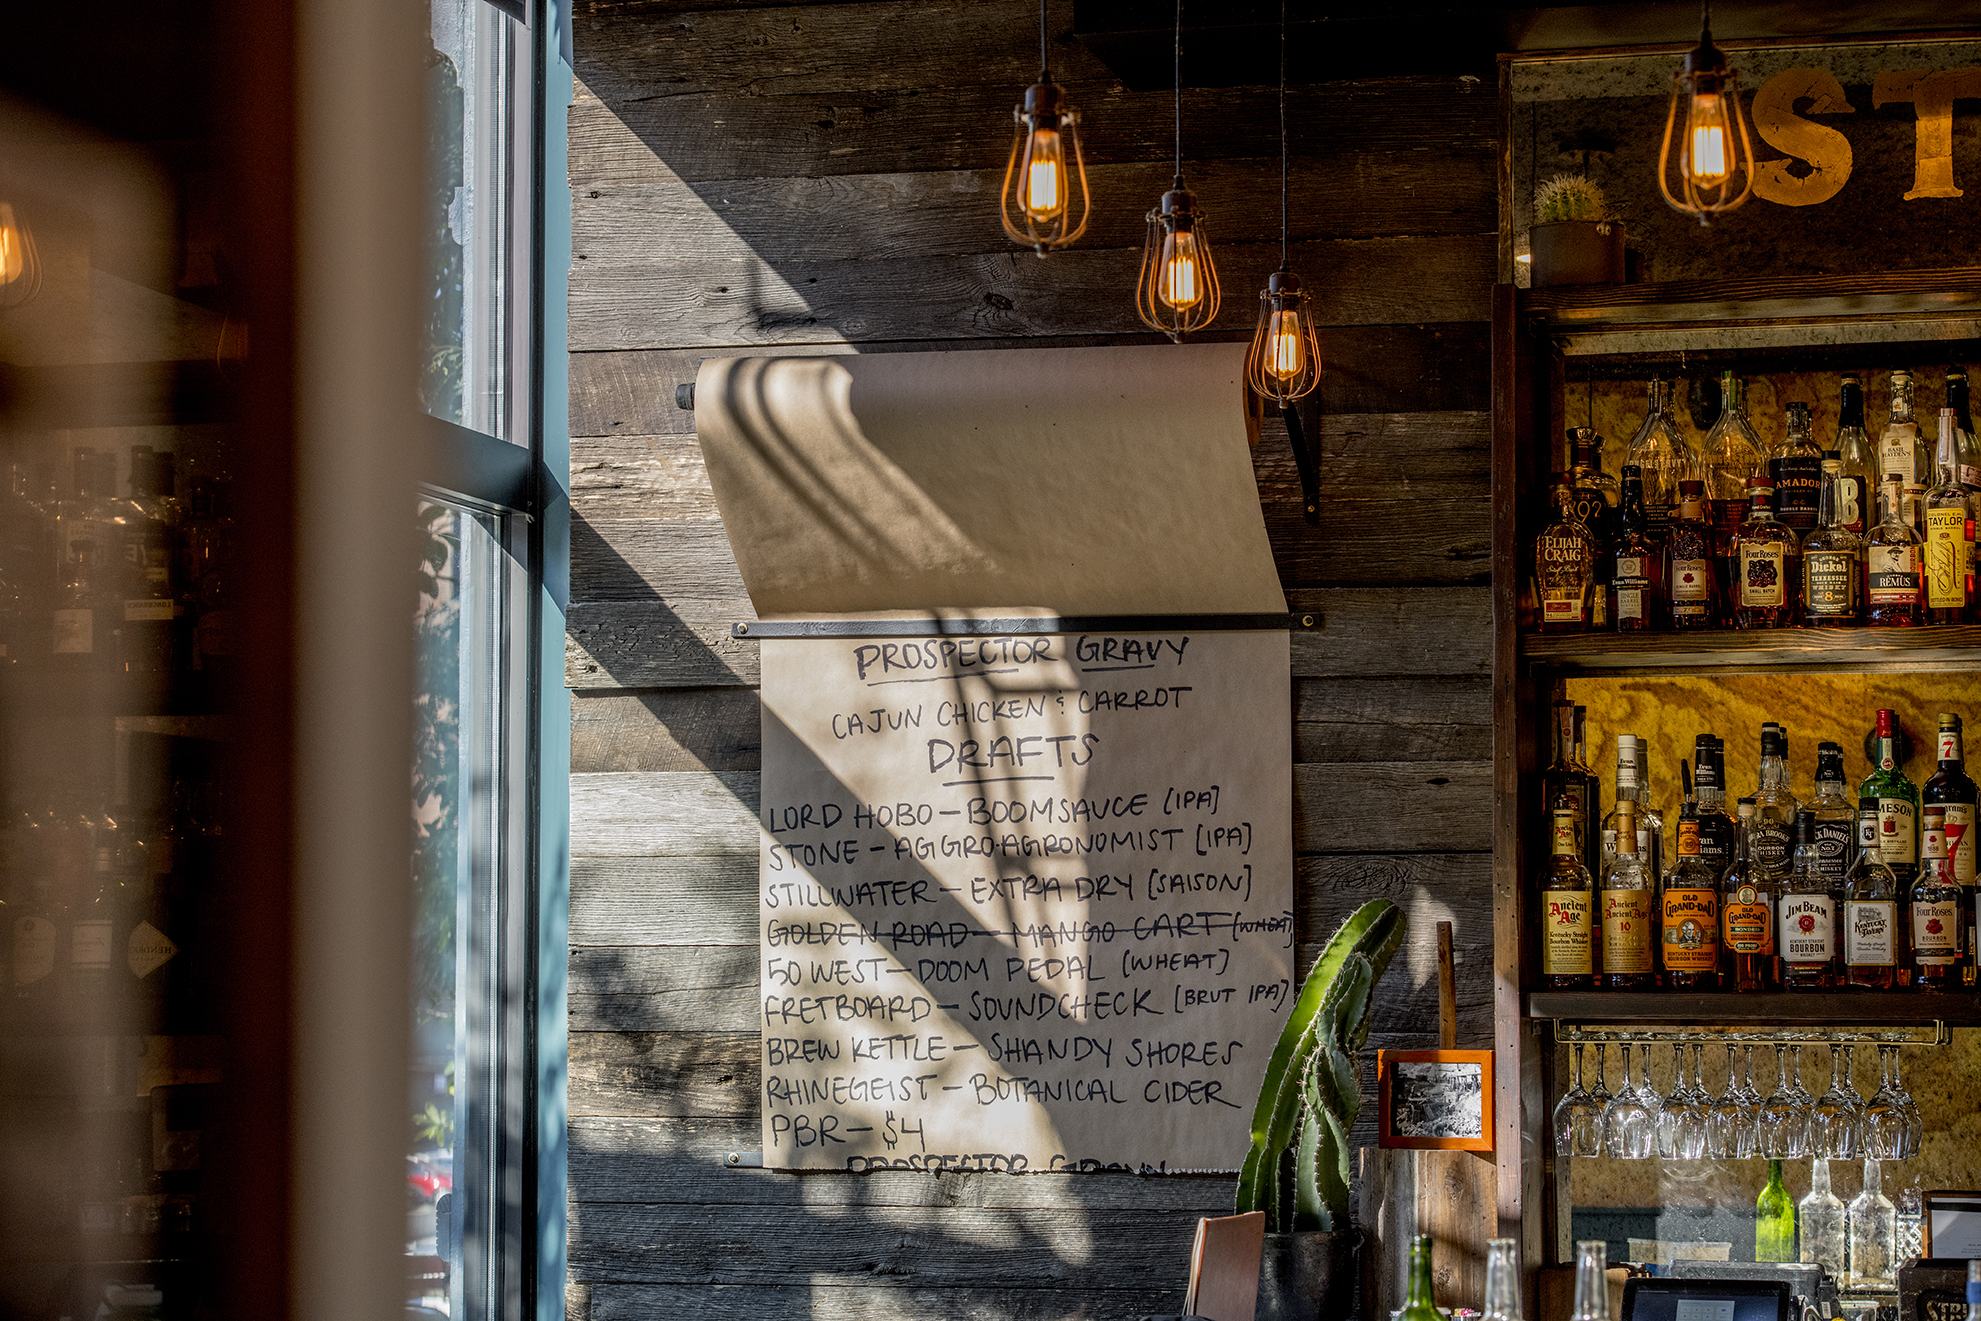  Daily specials at  Boomtown Biscuits &amp; Whiskey  presented on parchment paper. || Image:  Twin Spire Photography  - Published: 10.9.2019 